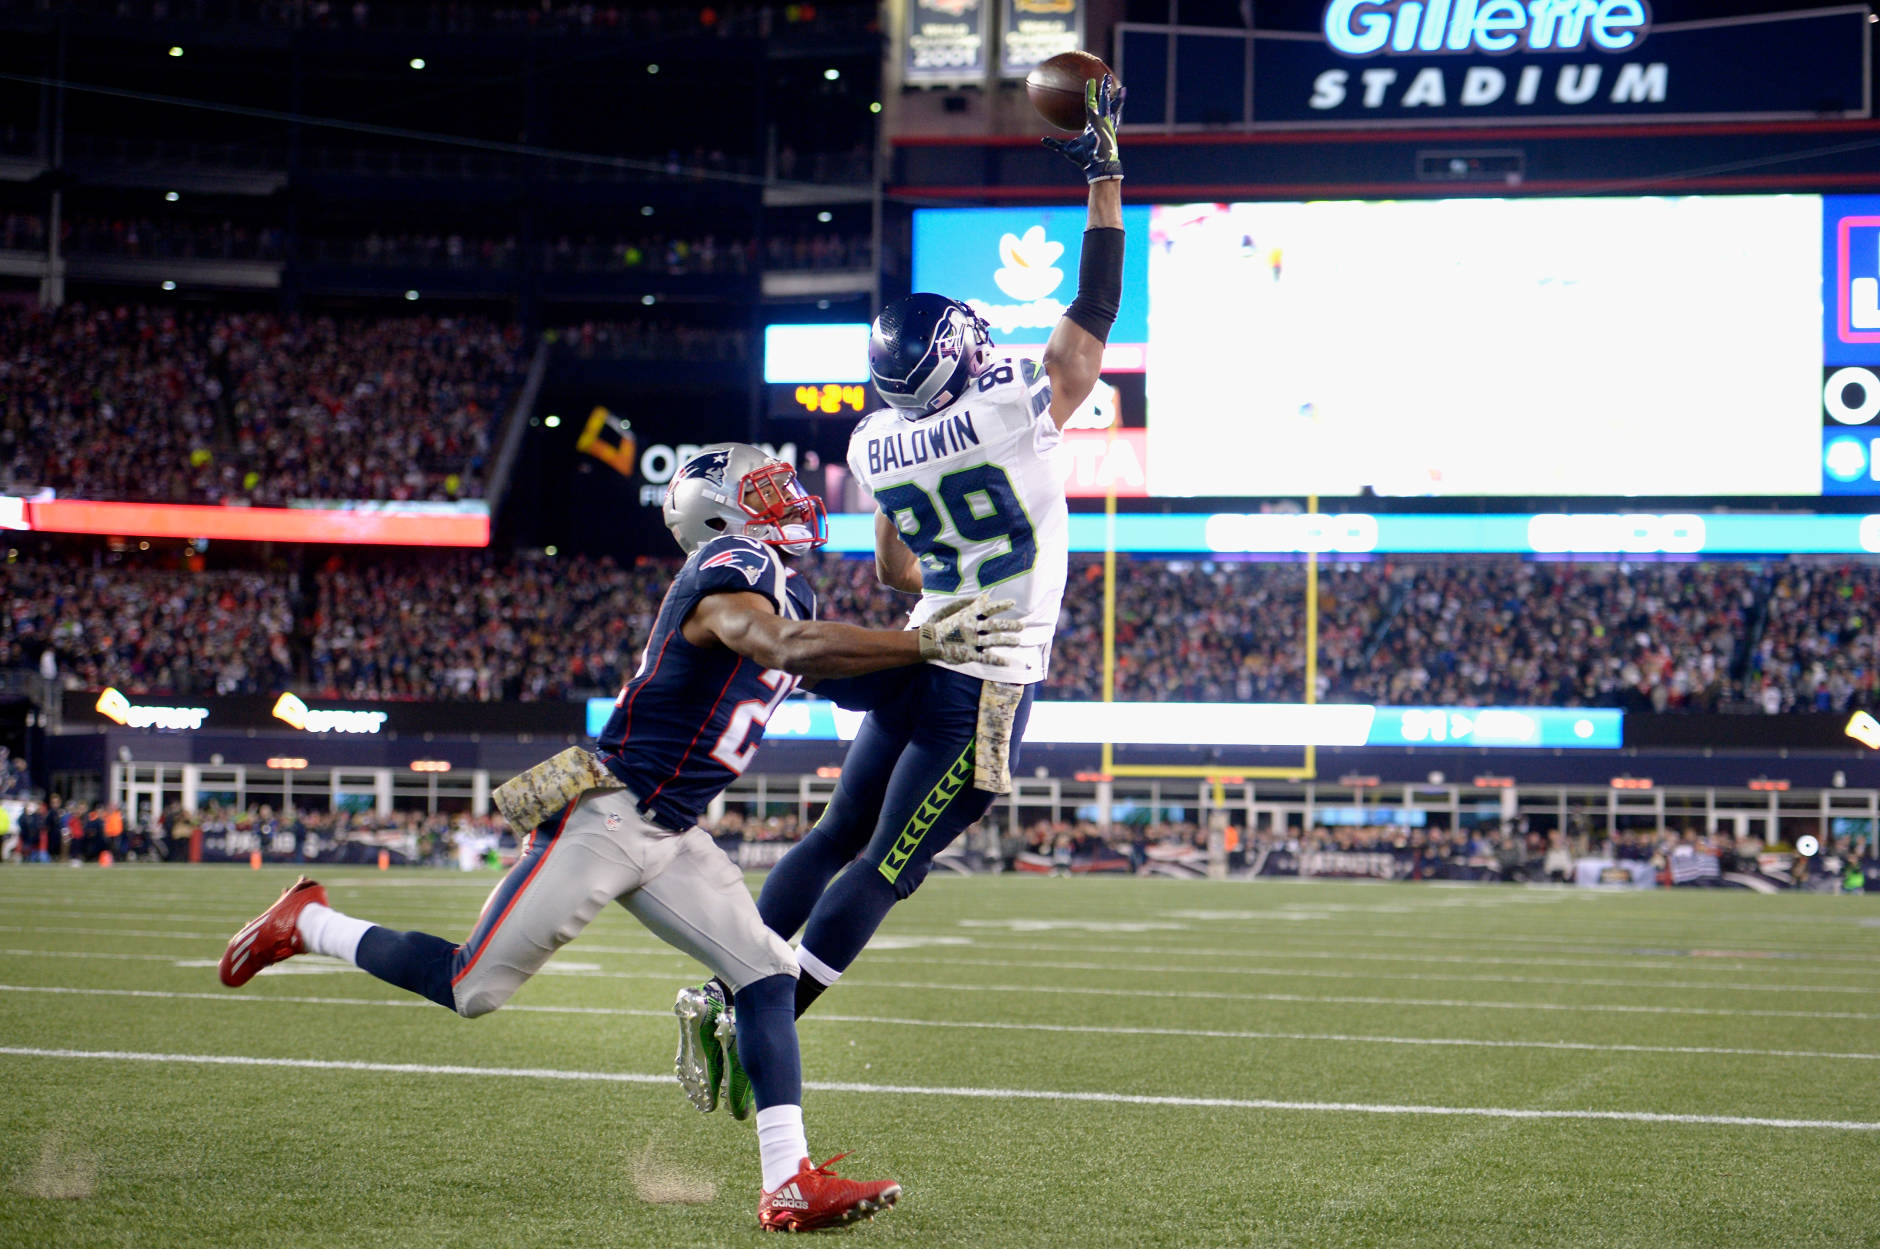 FOXBORO, MA - NOVEMBER 13:  Doug Baldwin #89 of the Seattle Seahawks drops a two point conversion attempt as he is defended by Patrick Chung #23 of the New England Patriots during the fourth quarter of a game at Gillette Stadium on November 13, 2016 in Foxboro, Massachusetts.  (Photo by Adam Glanzman/Getty Images)